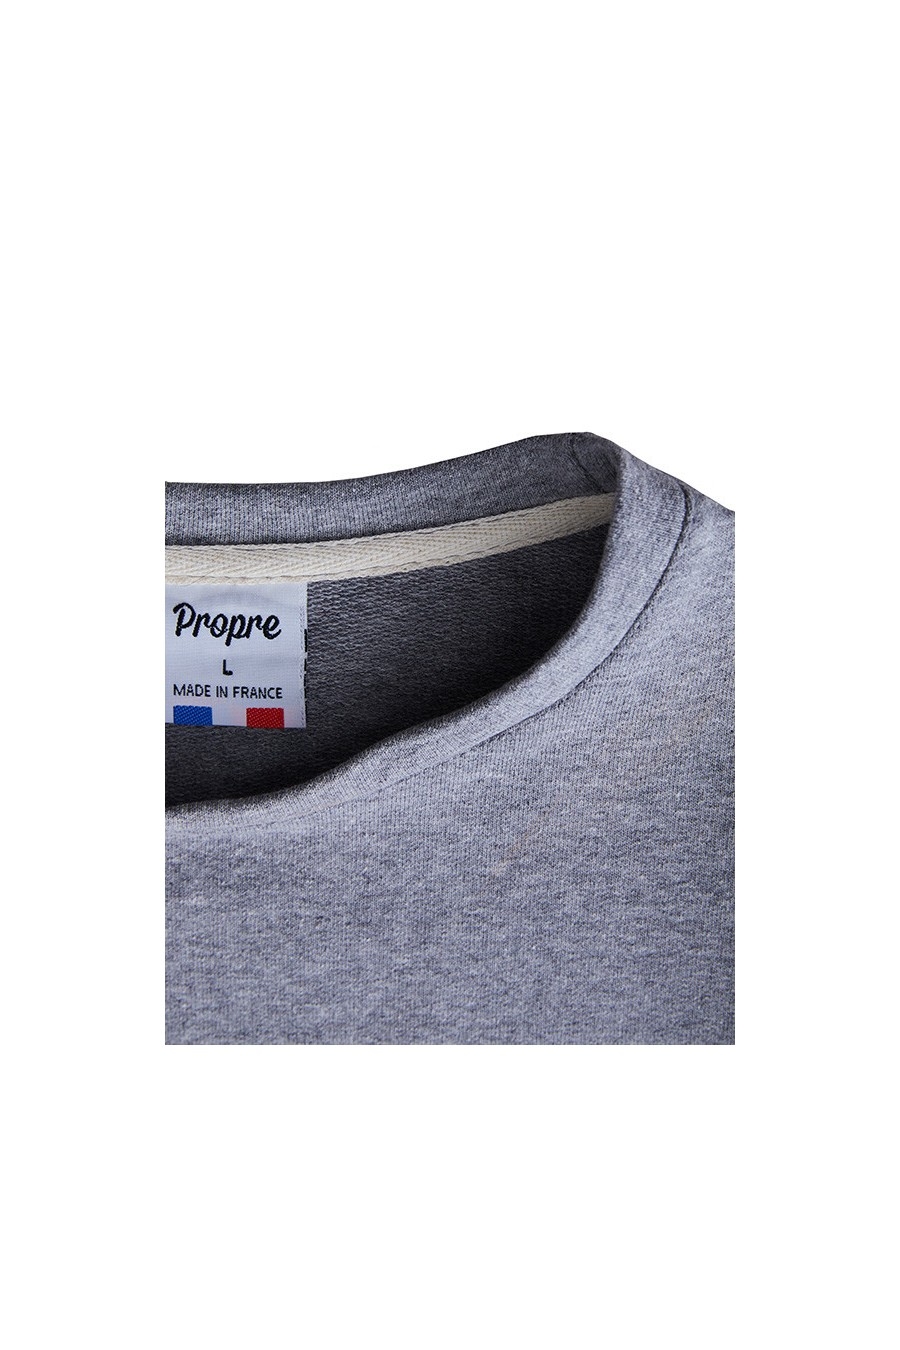 SWEAT HOMME GRIS UNI - 100% recyclé & Made in France